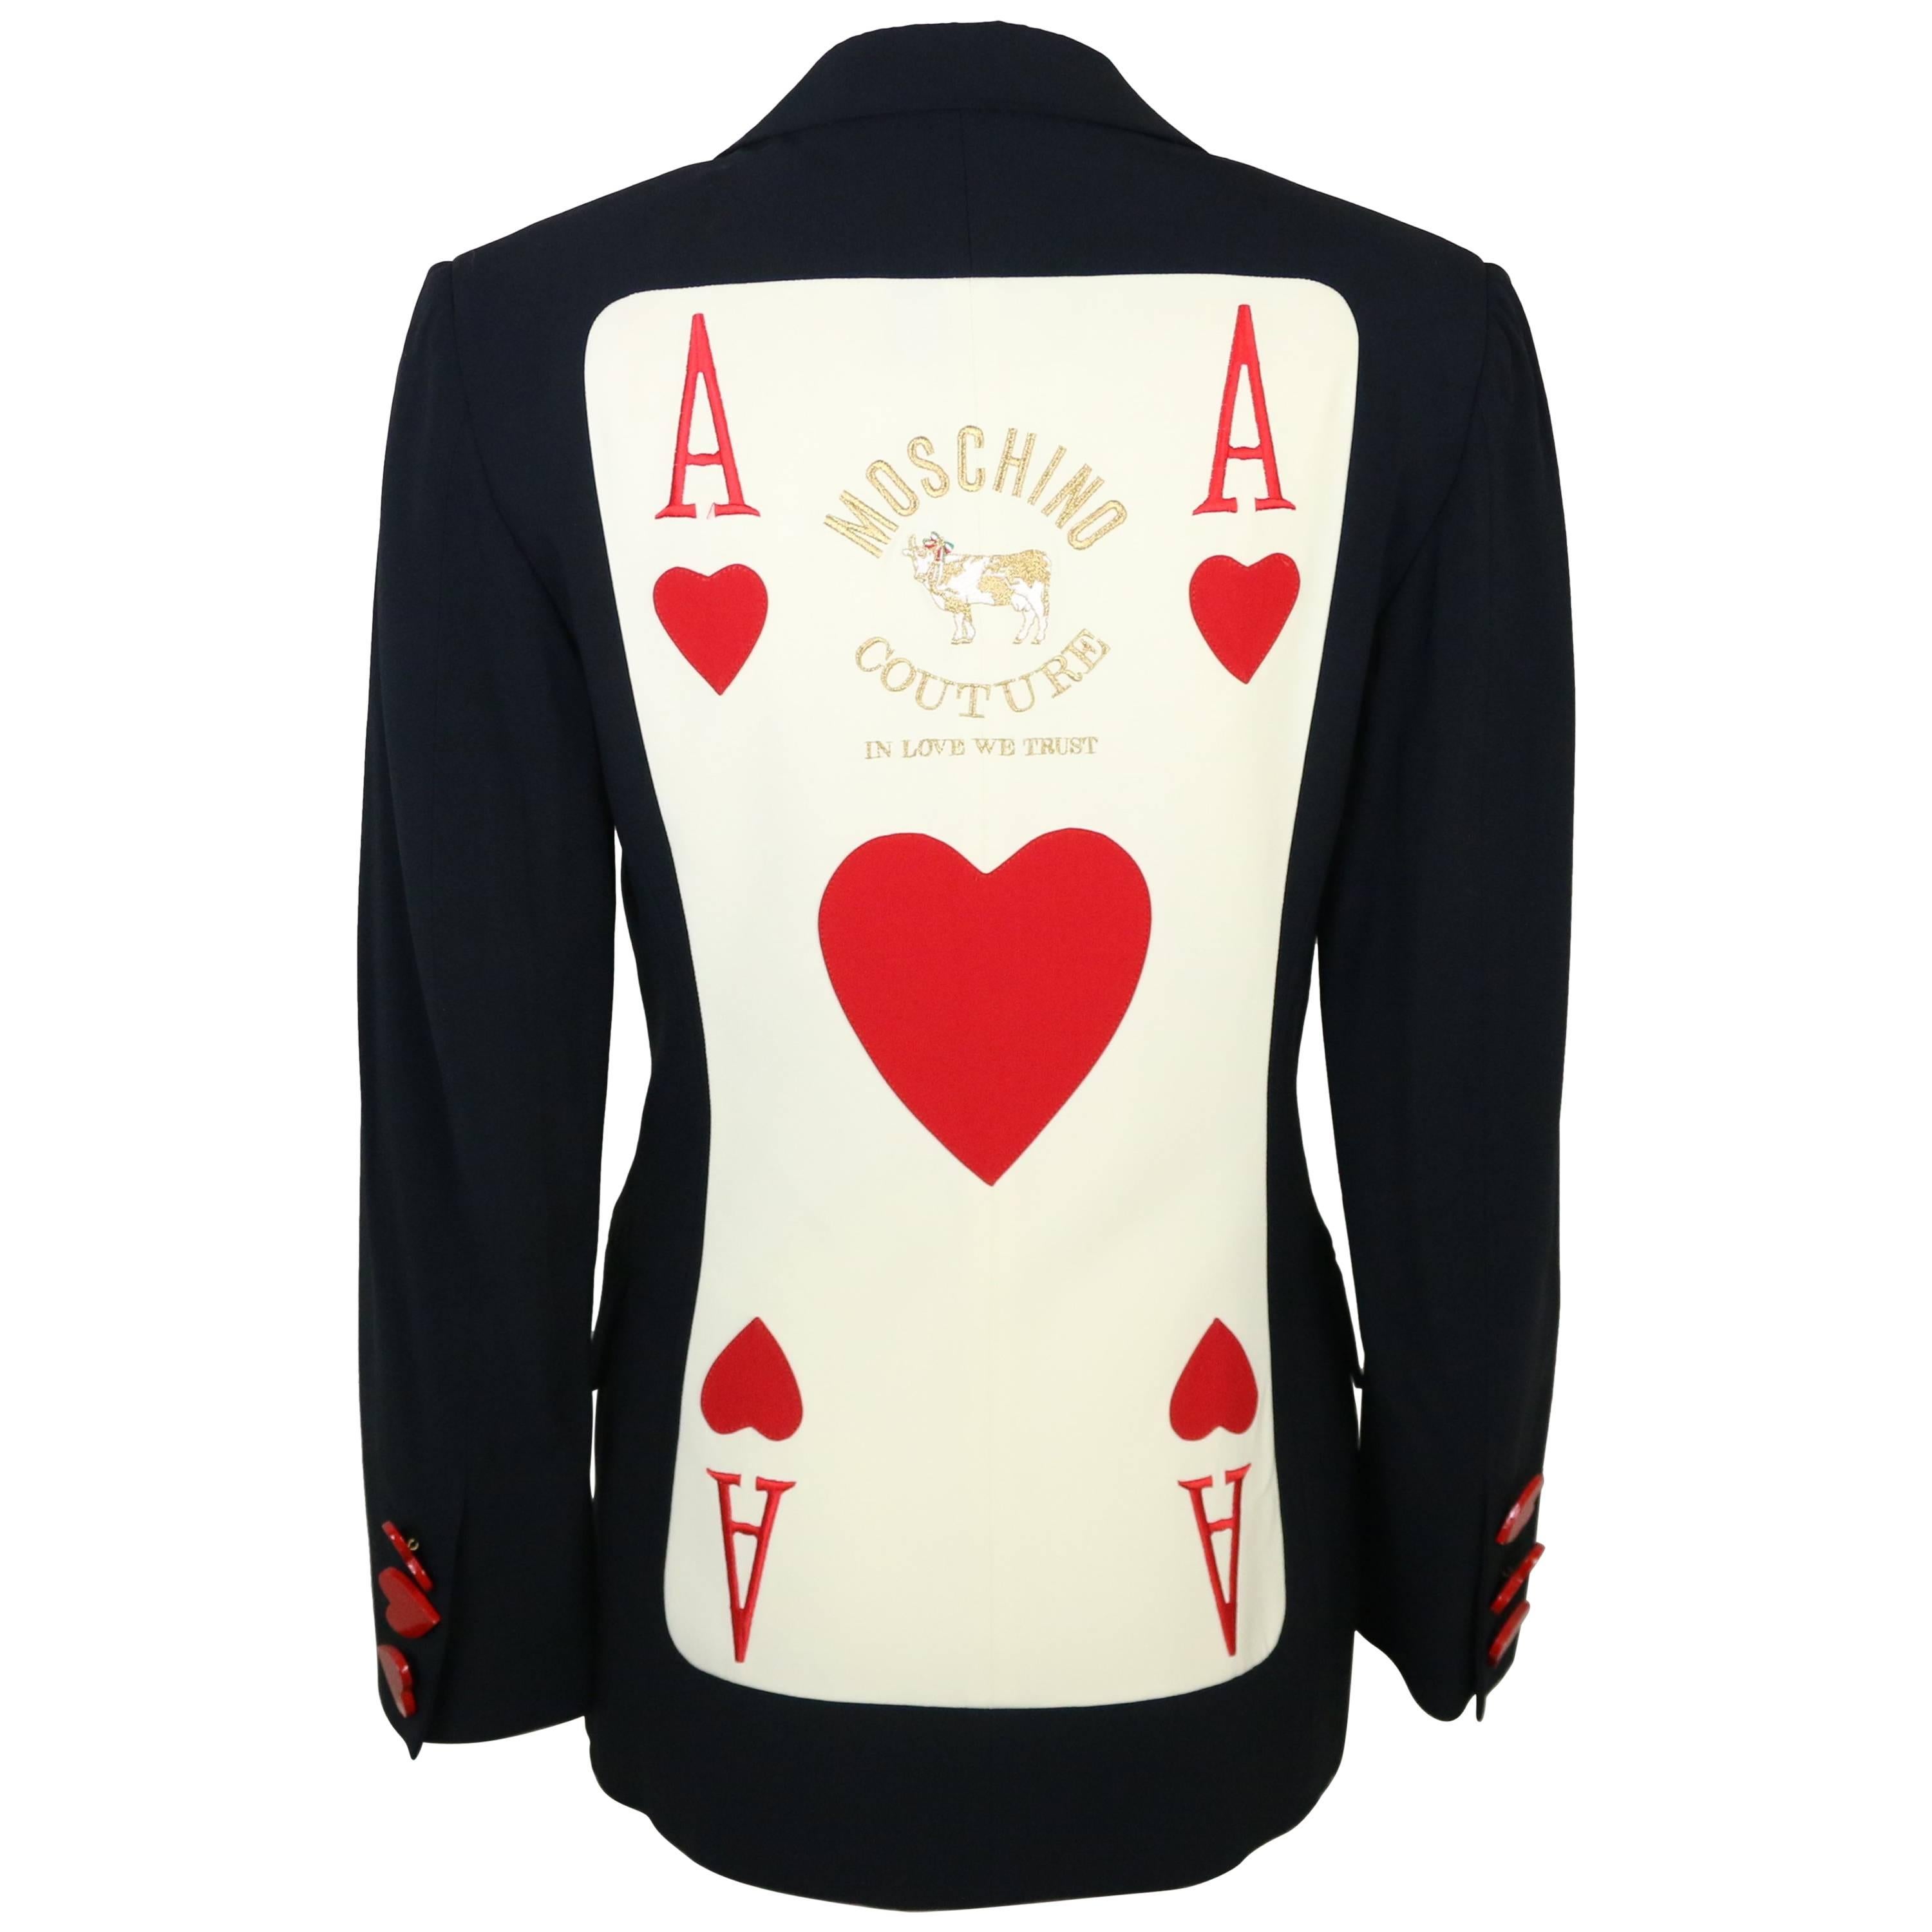 Moschino Couture "Aces of Hearts" Black Blazer